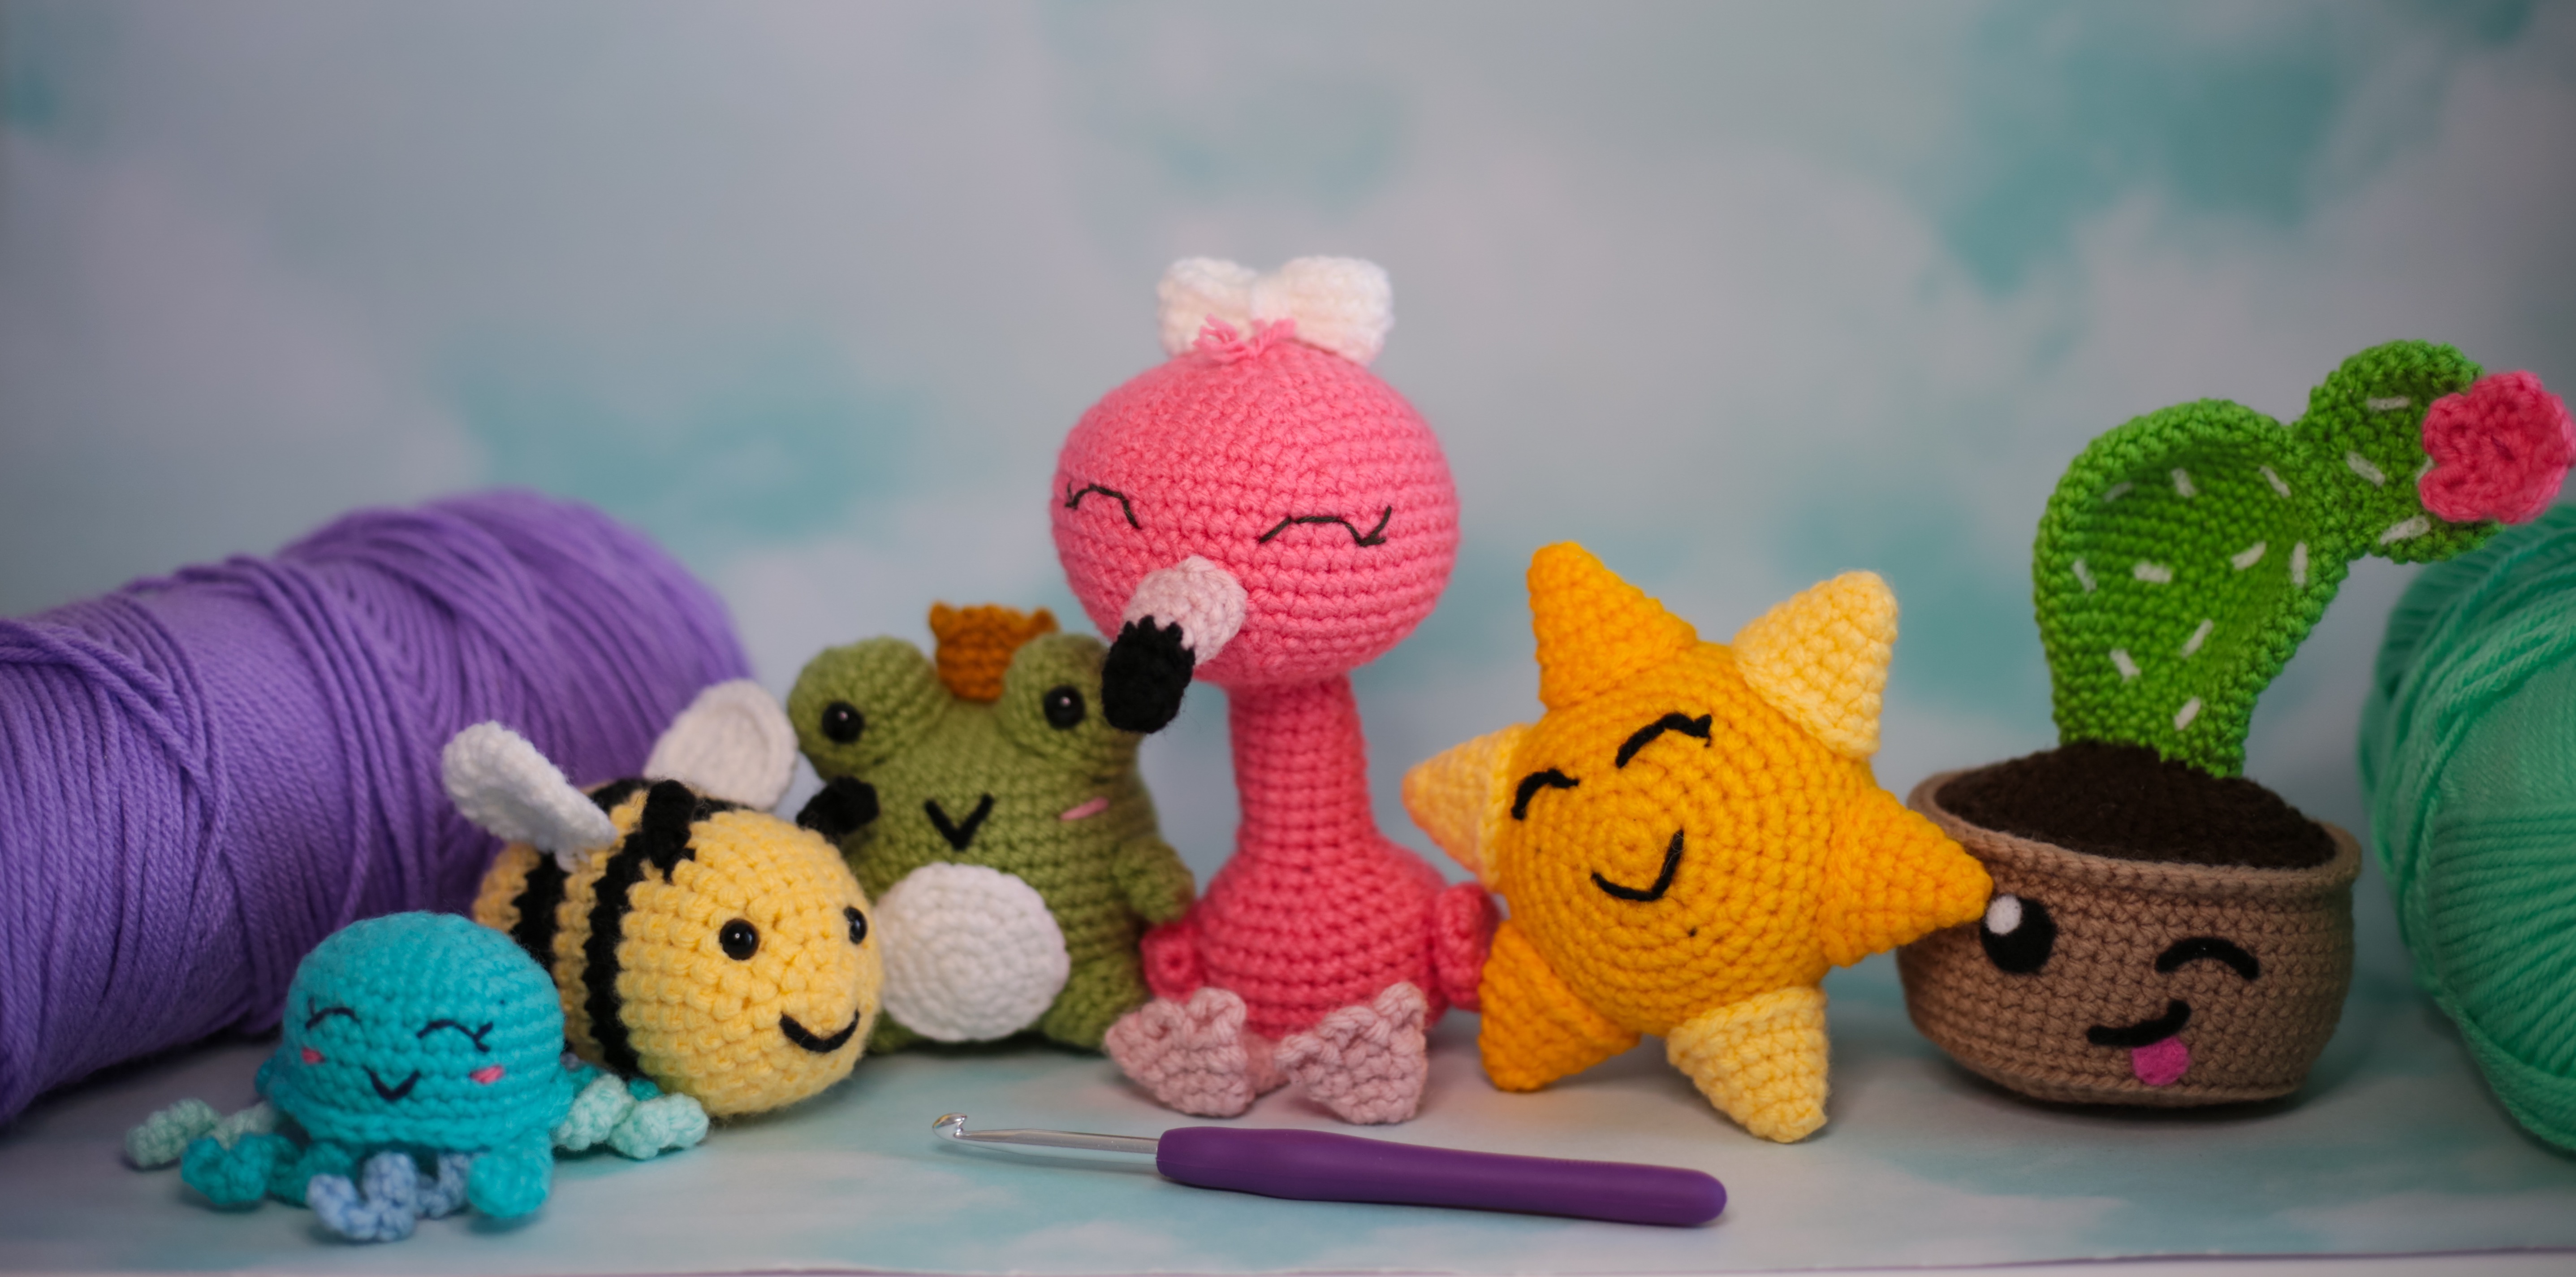 16 Free Single Crochet Patterns for Beginners - You Should Craft